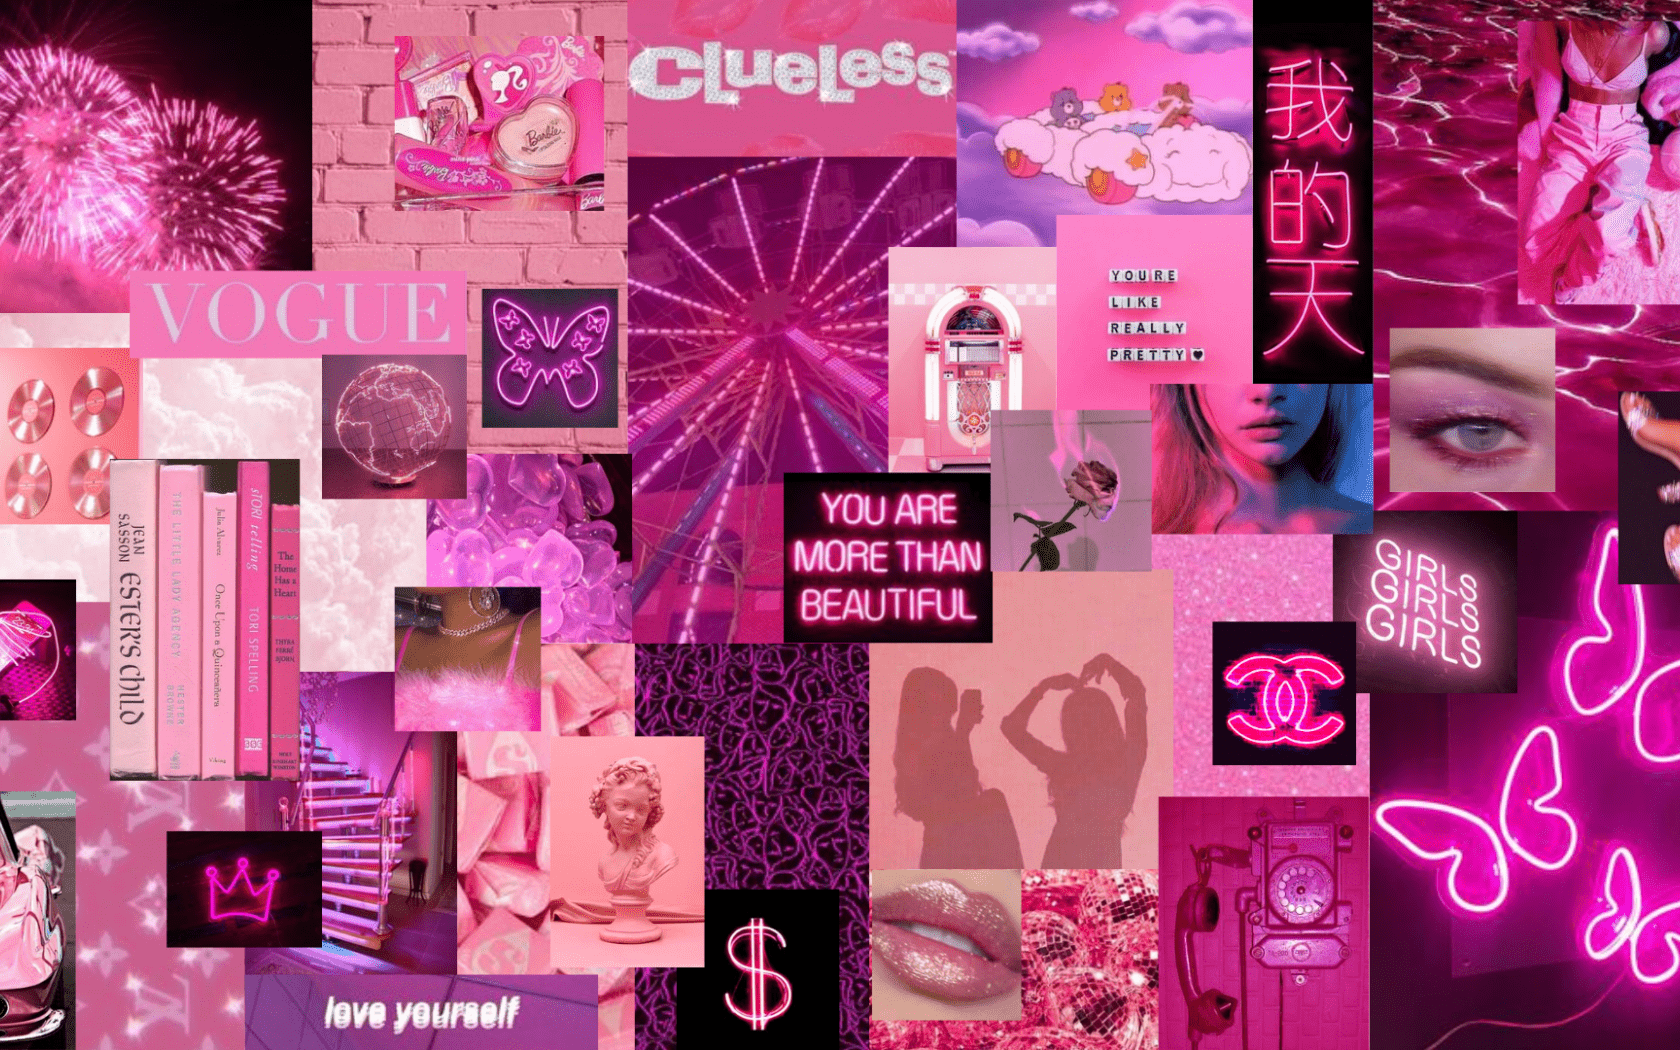 A collage of pink aesthetic images including neon signs, vogue images, and lips. - Pink collage